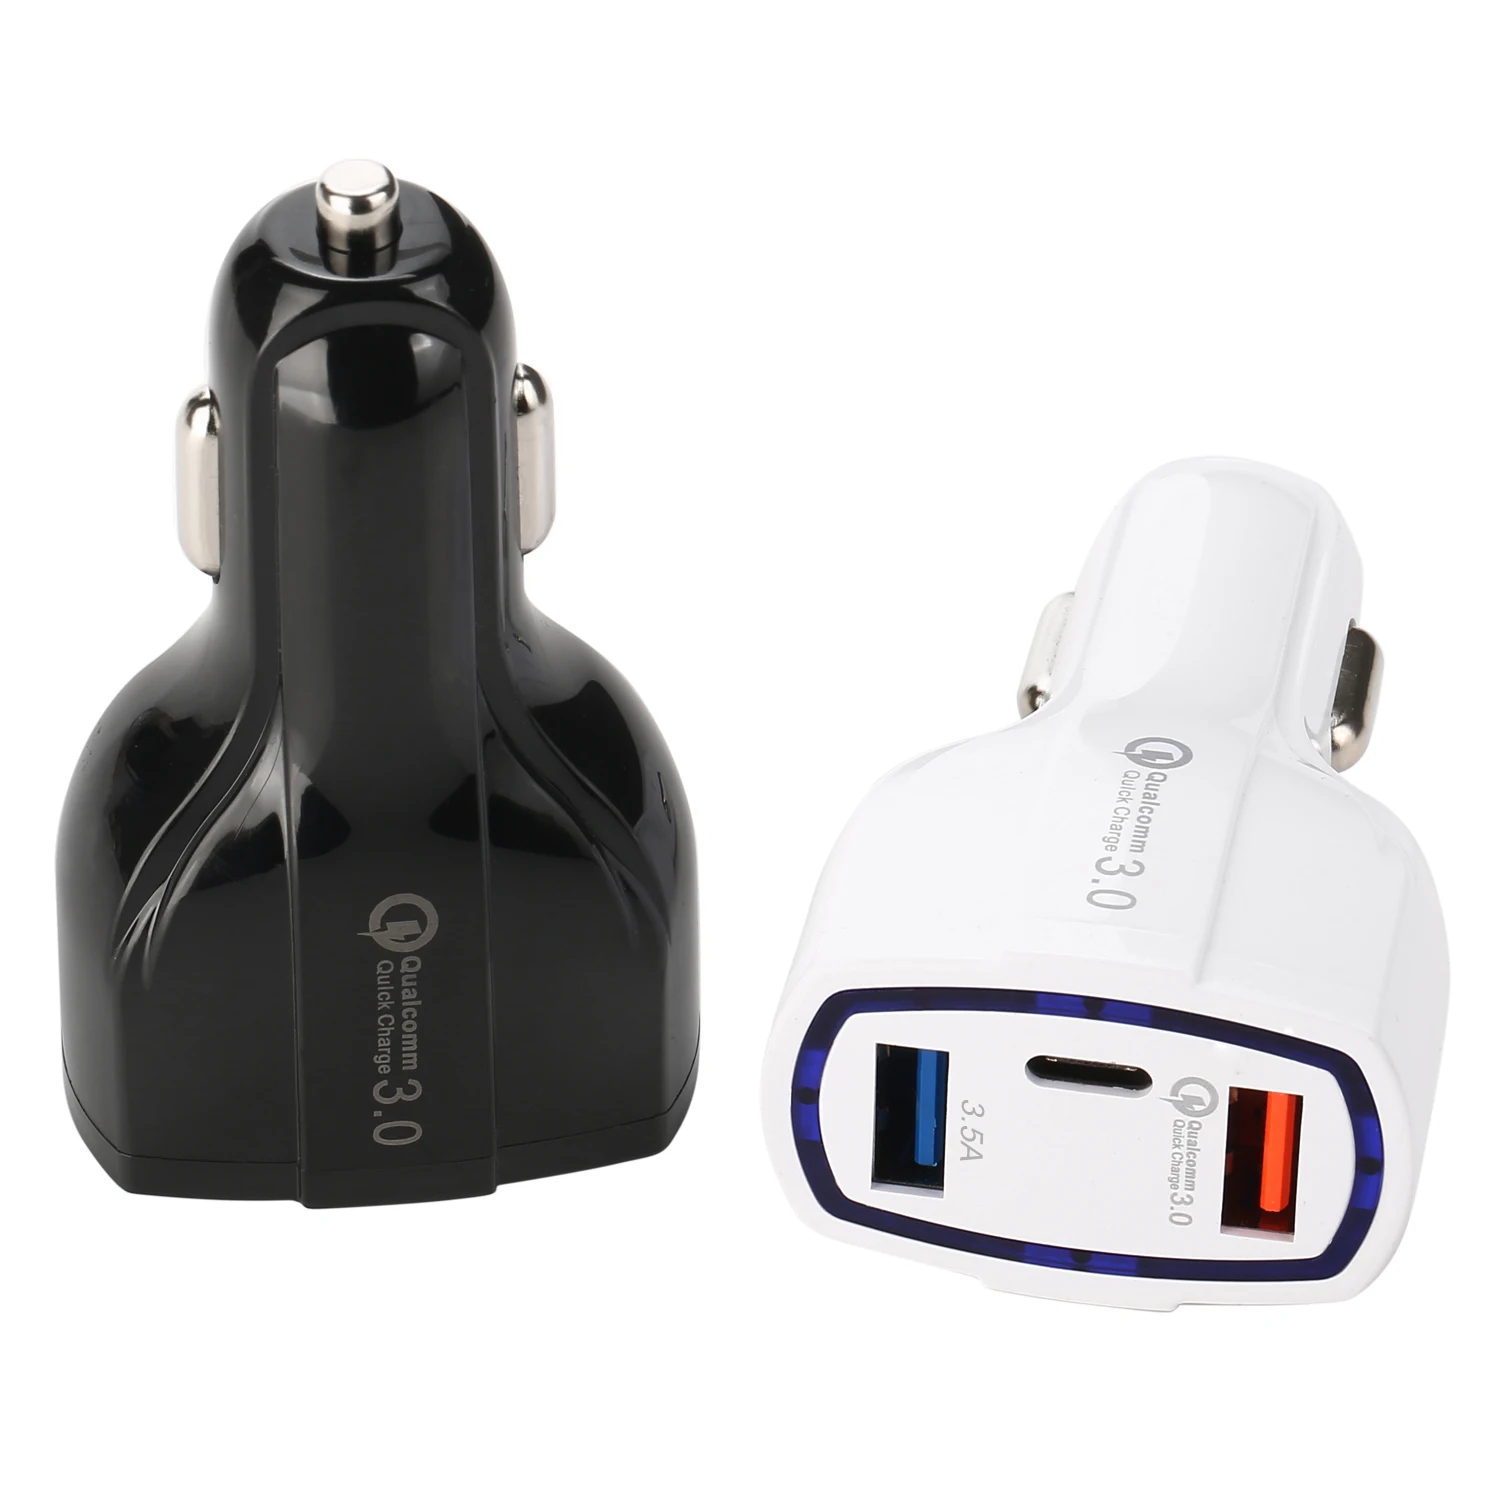 

QC3.0 LED Light USB C Fast Car Charger Qualcomm 3.0 Dual Port USB Car Mobile Phone Charger Adapter For iphone Tablet Pad Charge, Black/white